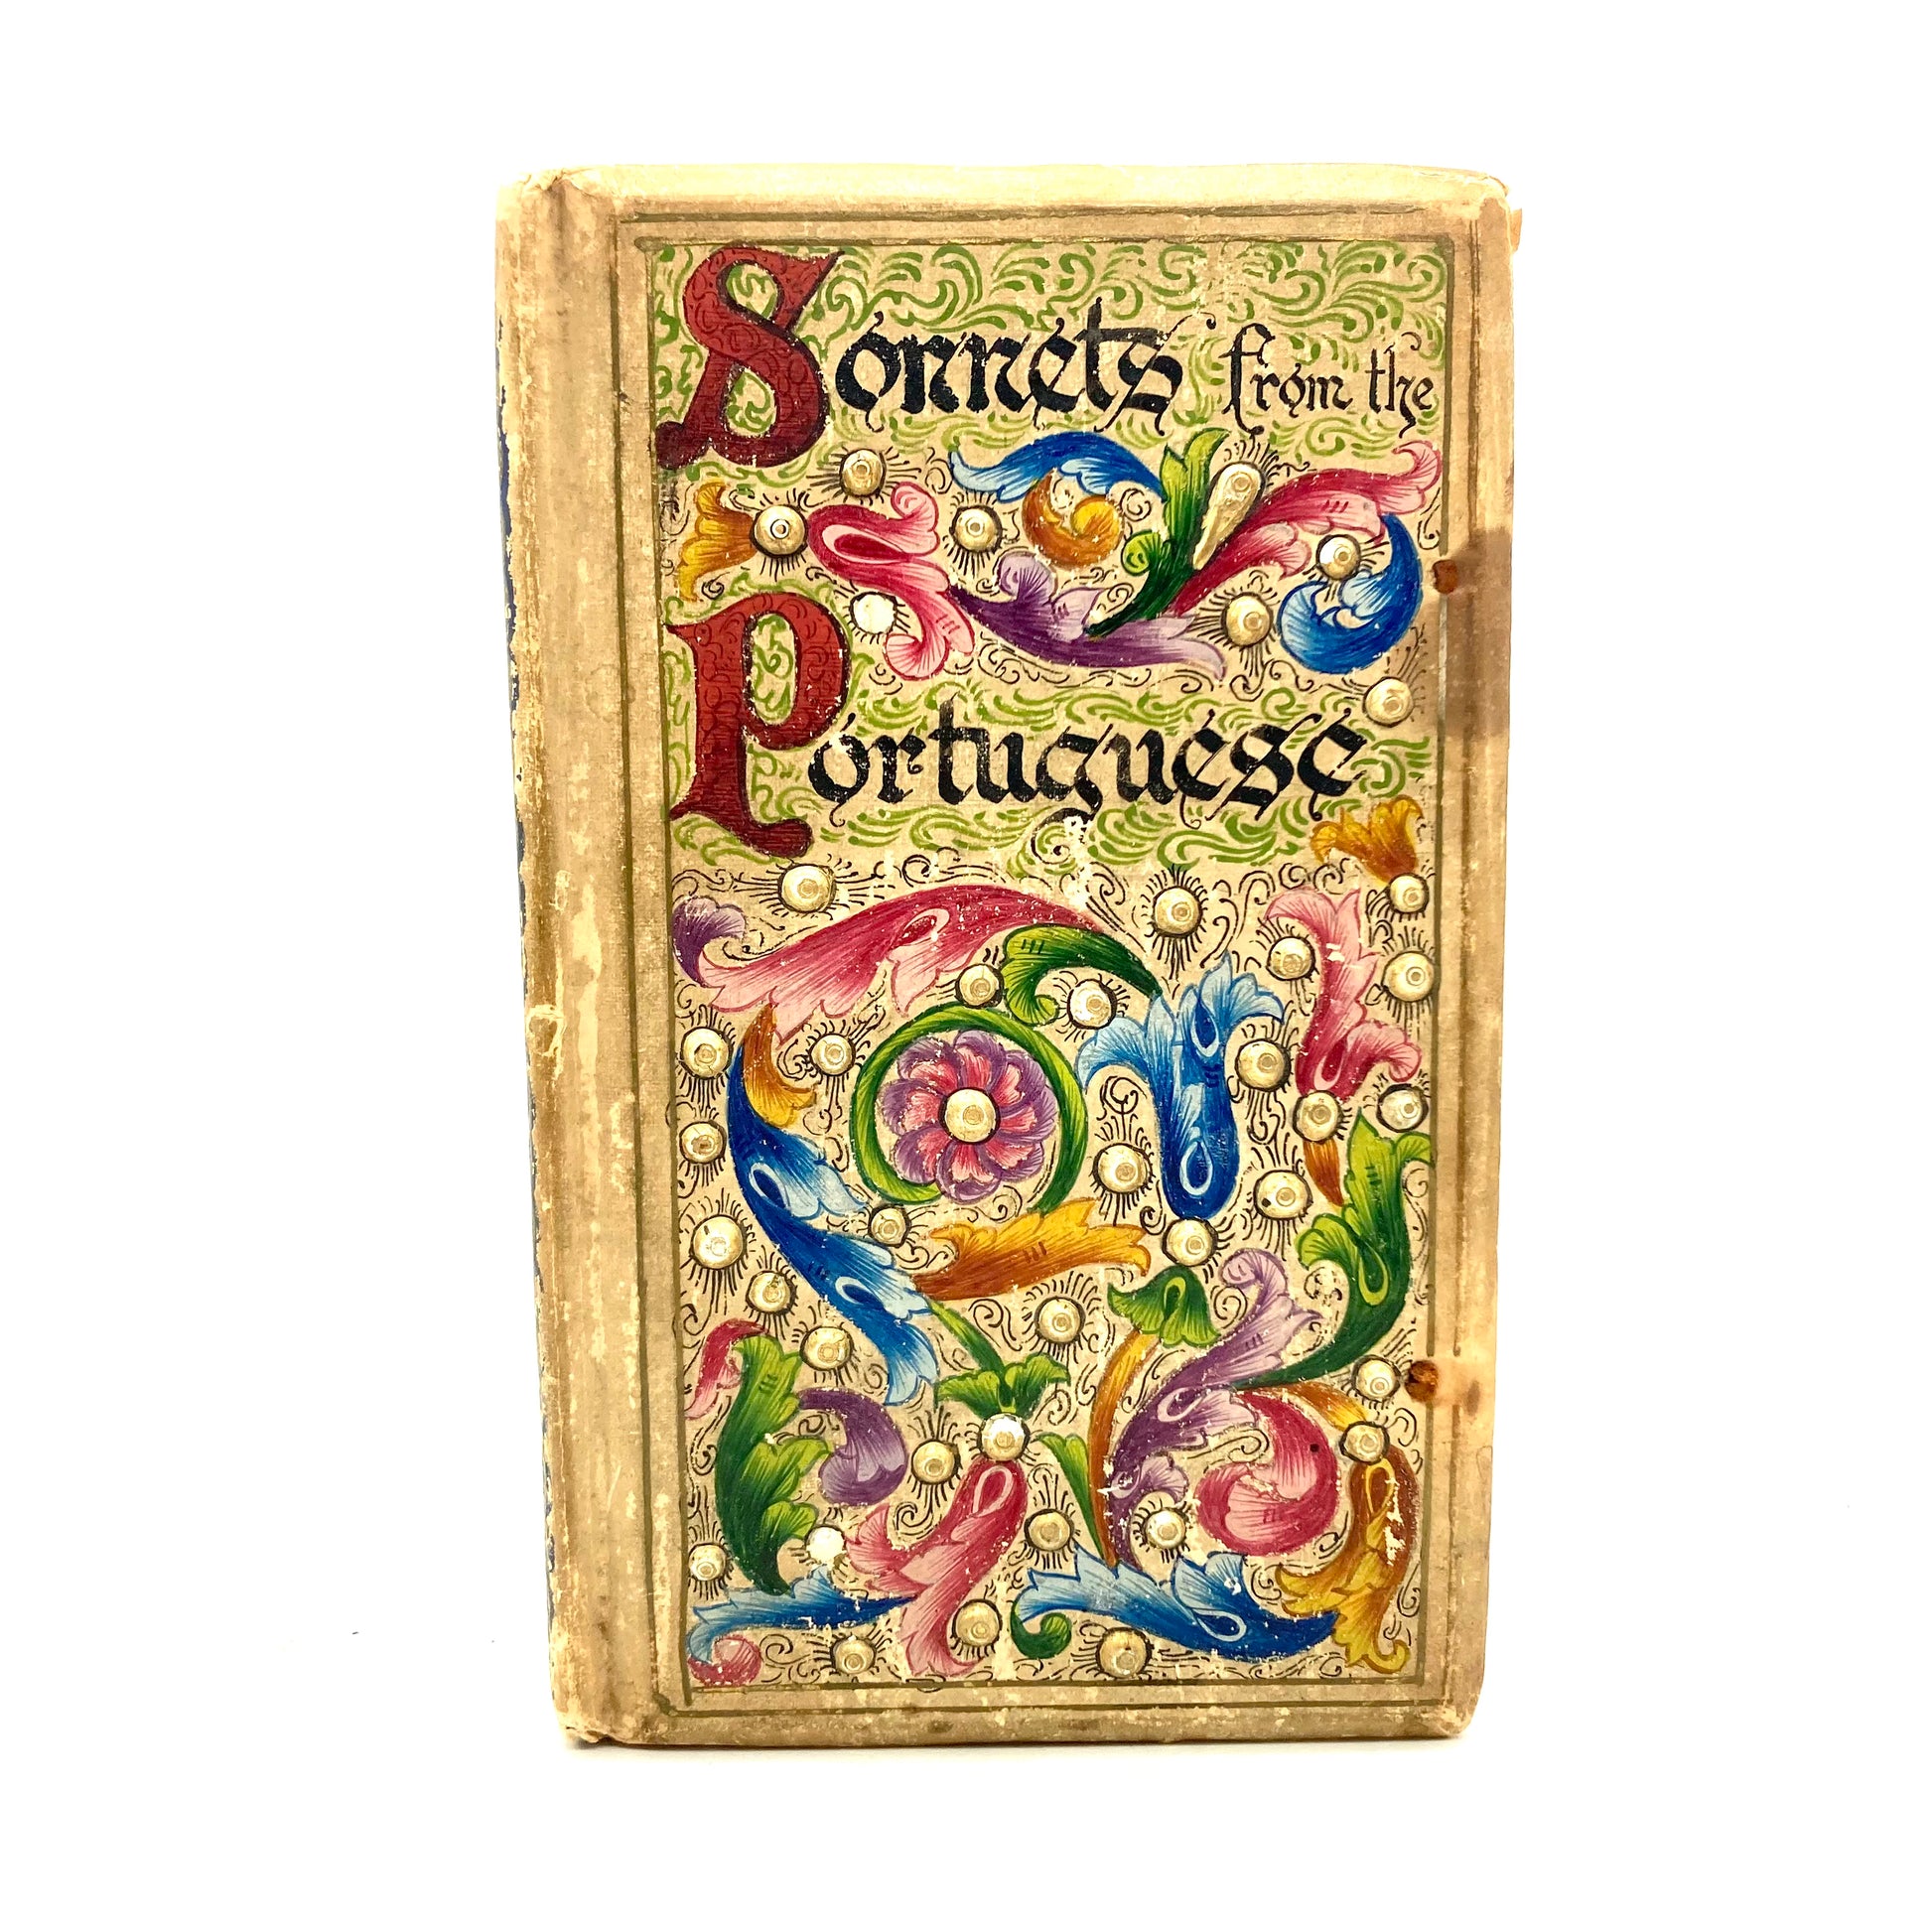 BROWNING, Elizabeth Barrett "Sonnets From the Portuguese" [S. Rosen, 1906] - Buzz Bookstore